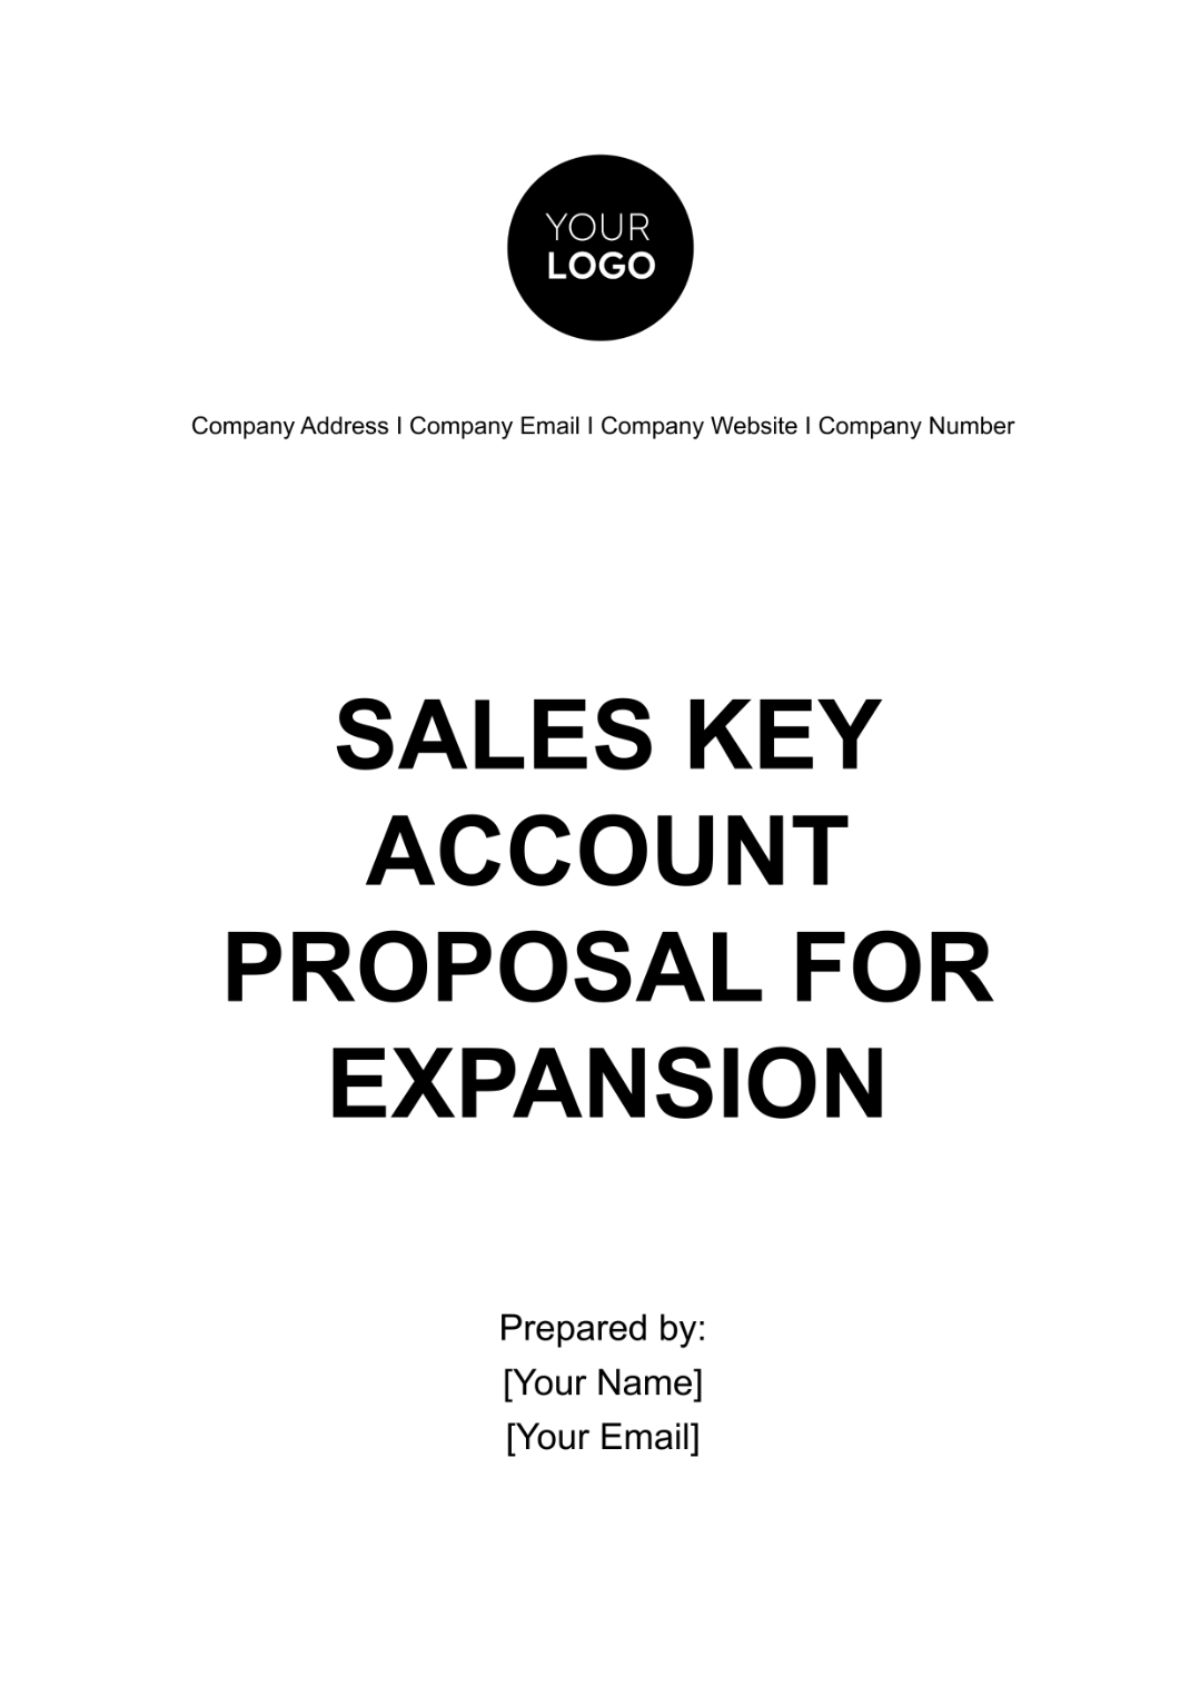 Free Sales Key Account Proposal for Expansion Template